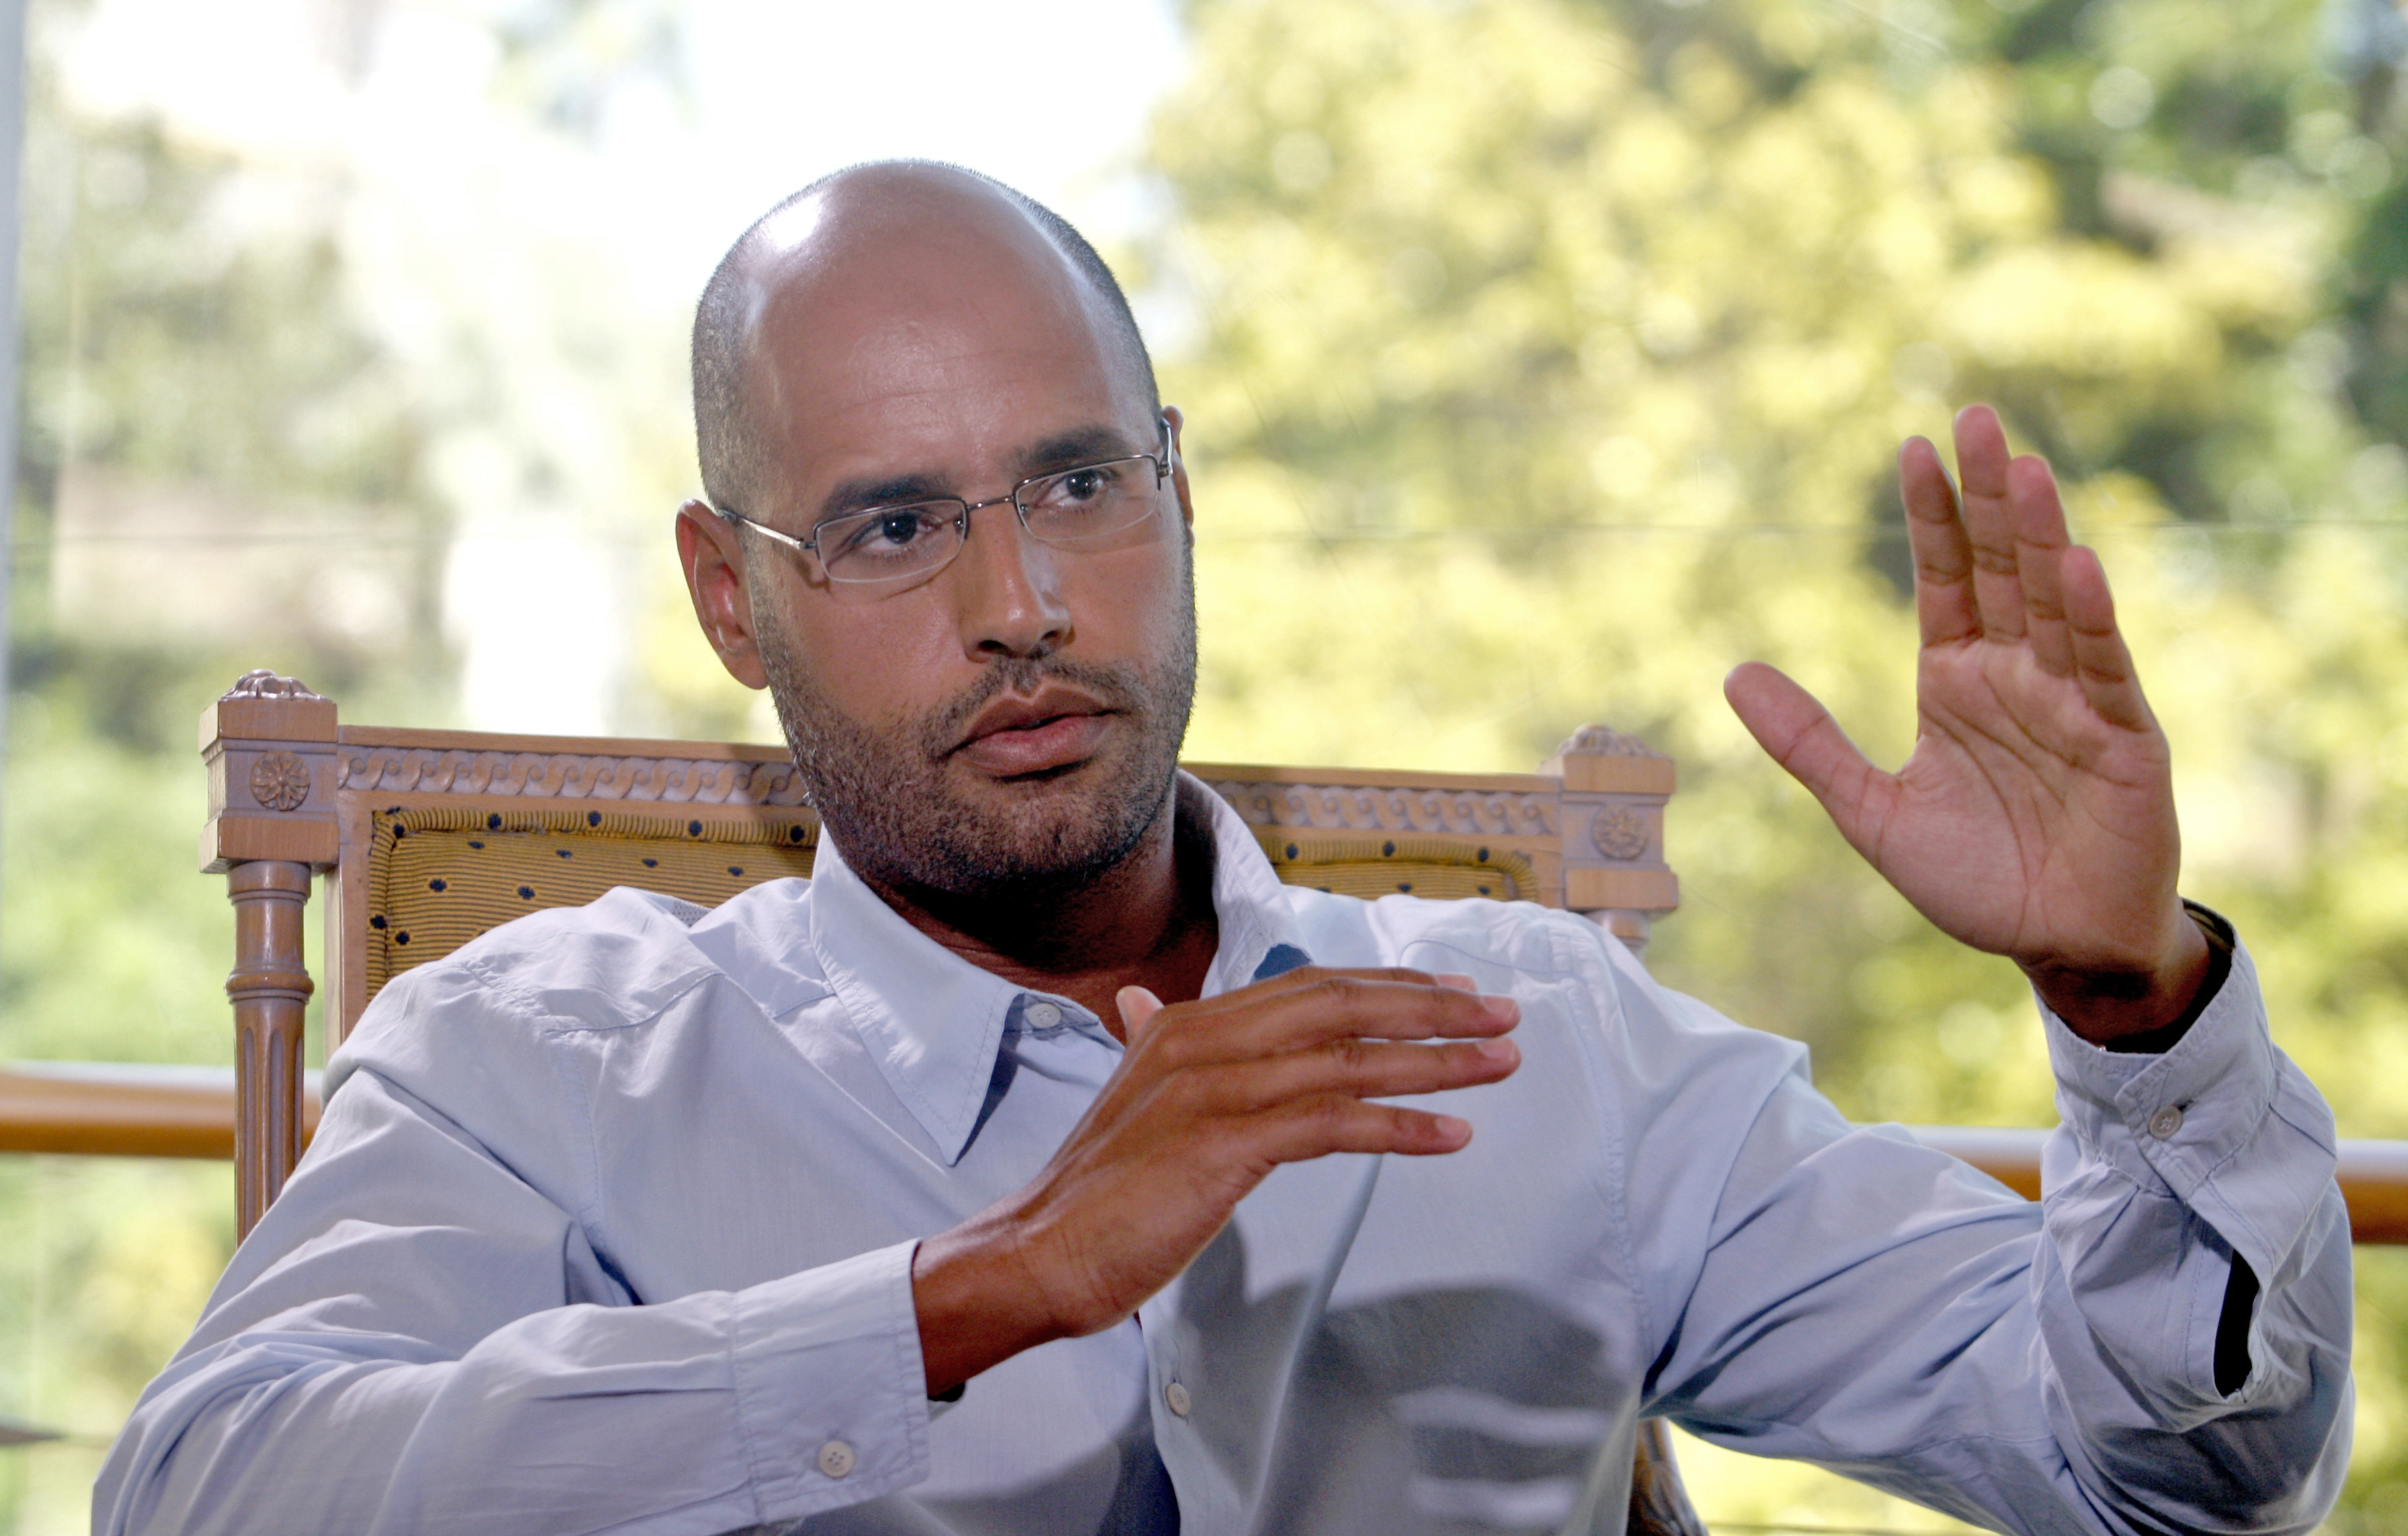 Saif al-Islam, son of Libyan leader Muammar Gaddafi, indicates that Libya plans an enhanced oil recovery round to develop its production capacity during an interview with Reuters in Nice July 30, 2007. Libya has held three oil exploration licensing rounds since the end of Western sanctions against the government in 2004, awarding permits to firms in what is considered one of the world's last under-explored oil-promising regions.   REUTERS/Gilbert Tourte   (FRANCE) - RTR1SDZB